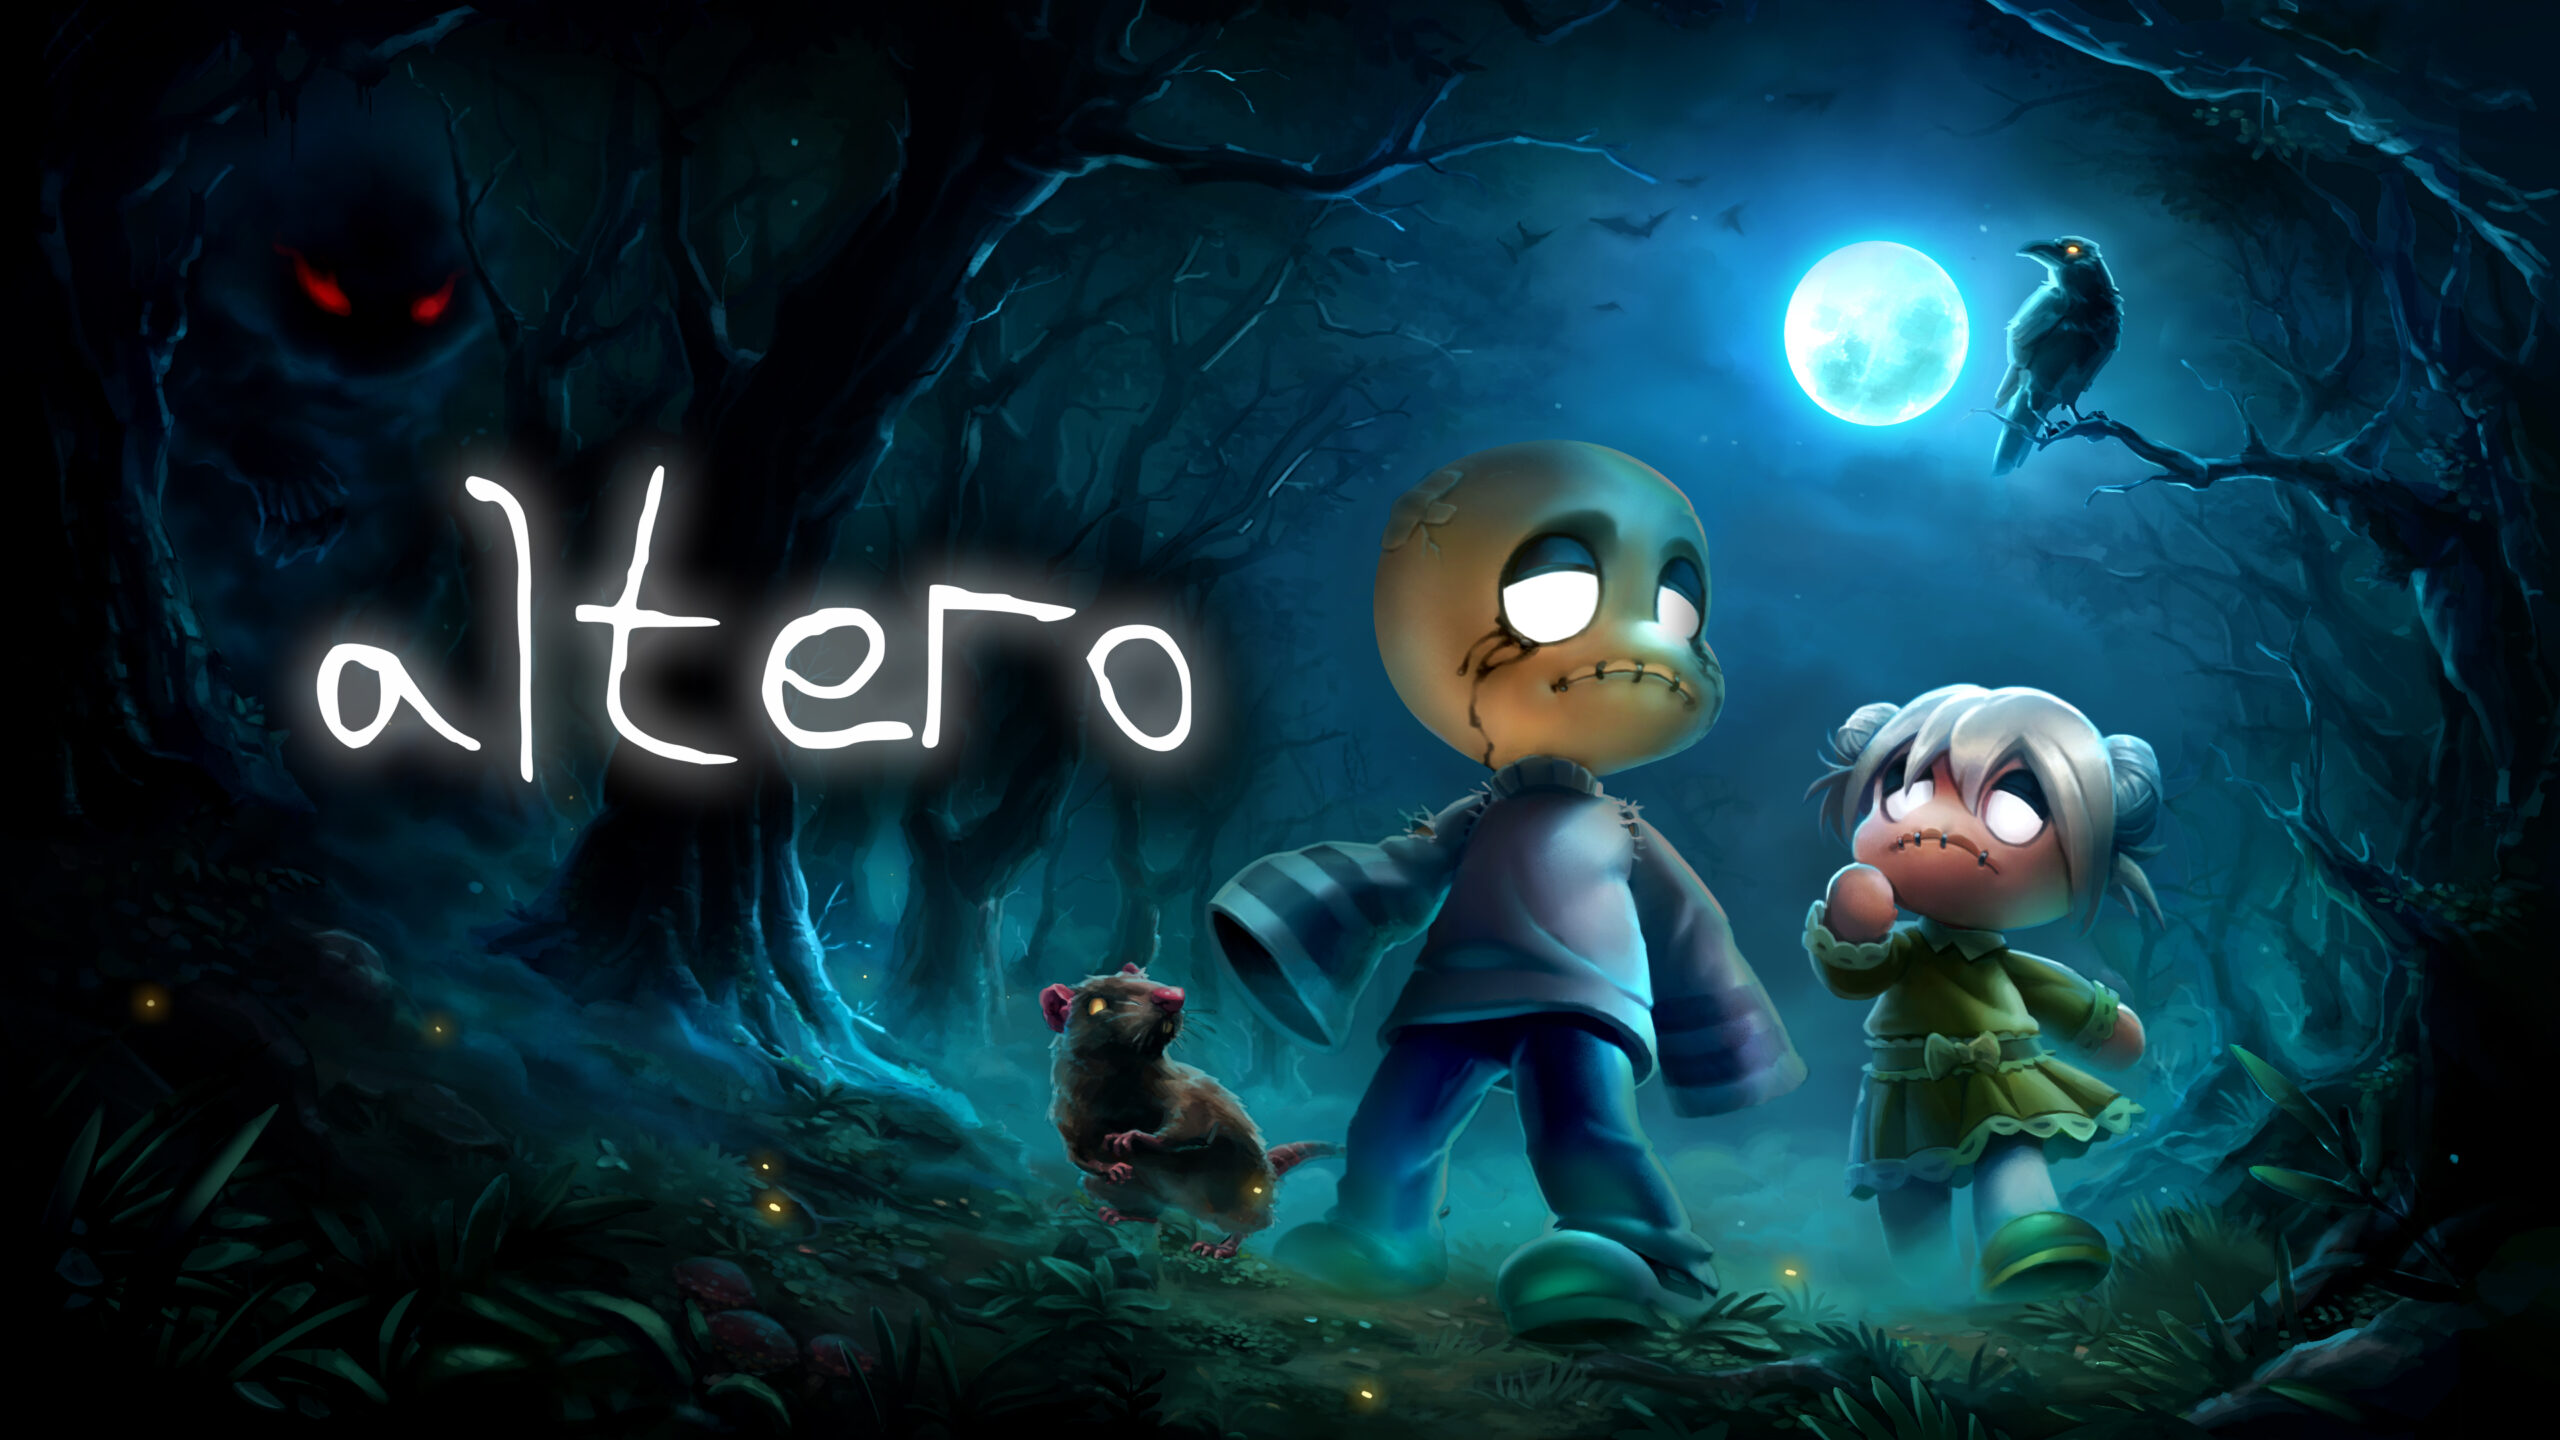 Altero is a new atmospheric puzzle platformer game where players take on the role of a voodoo doll 1